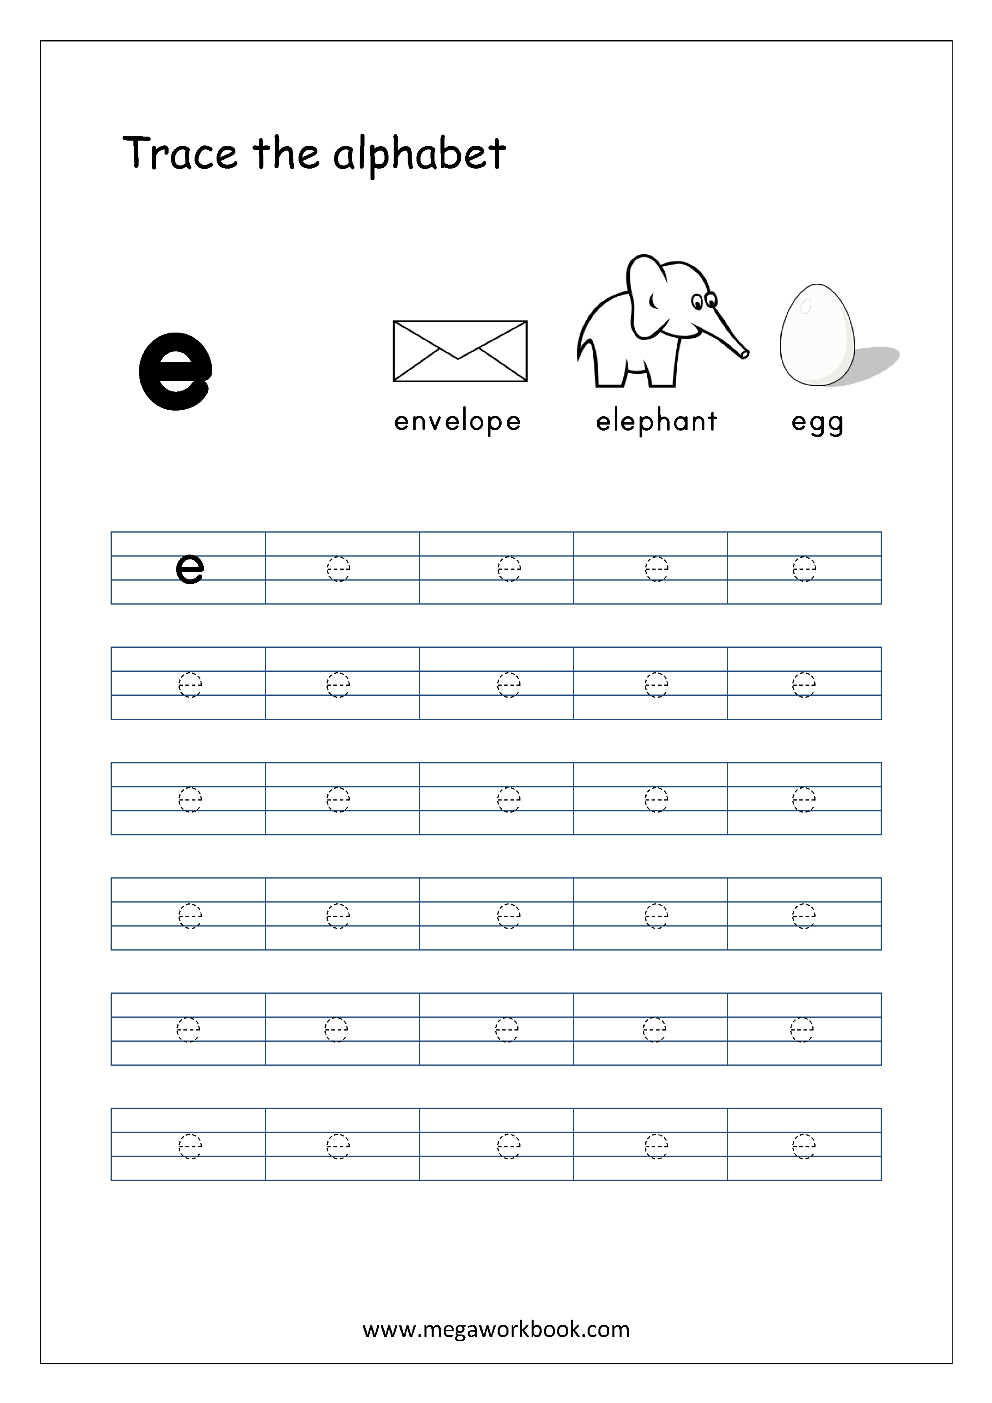 English Worksheet - Alphabet Tracing - Small Letter E intended for Tracing Letters Worksheets